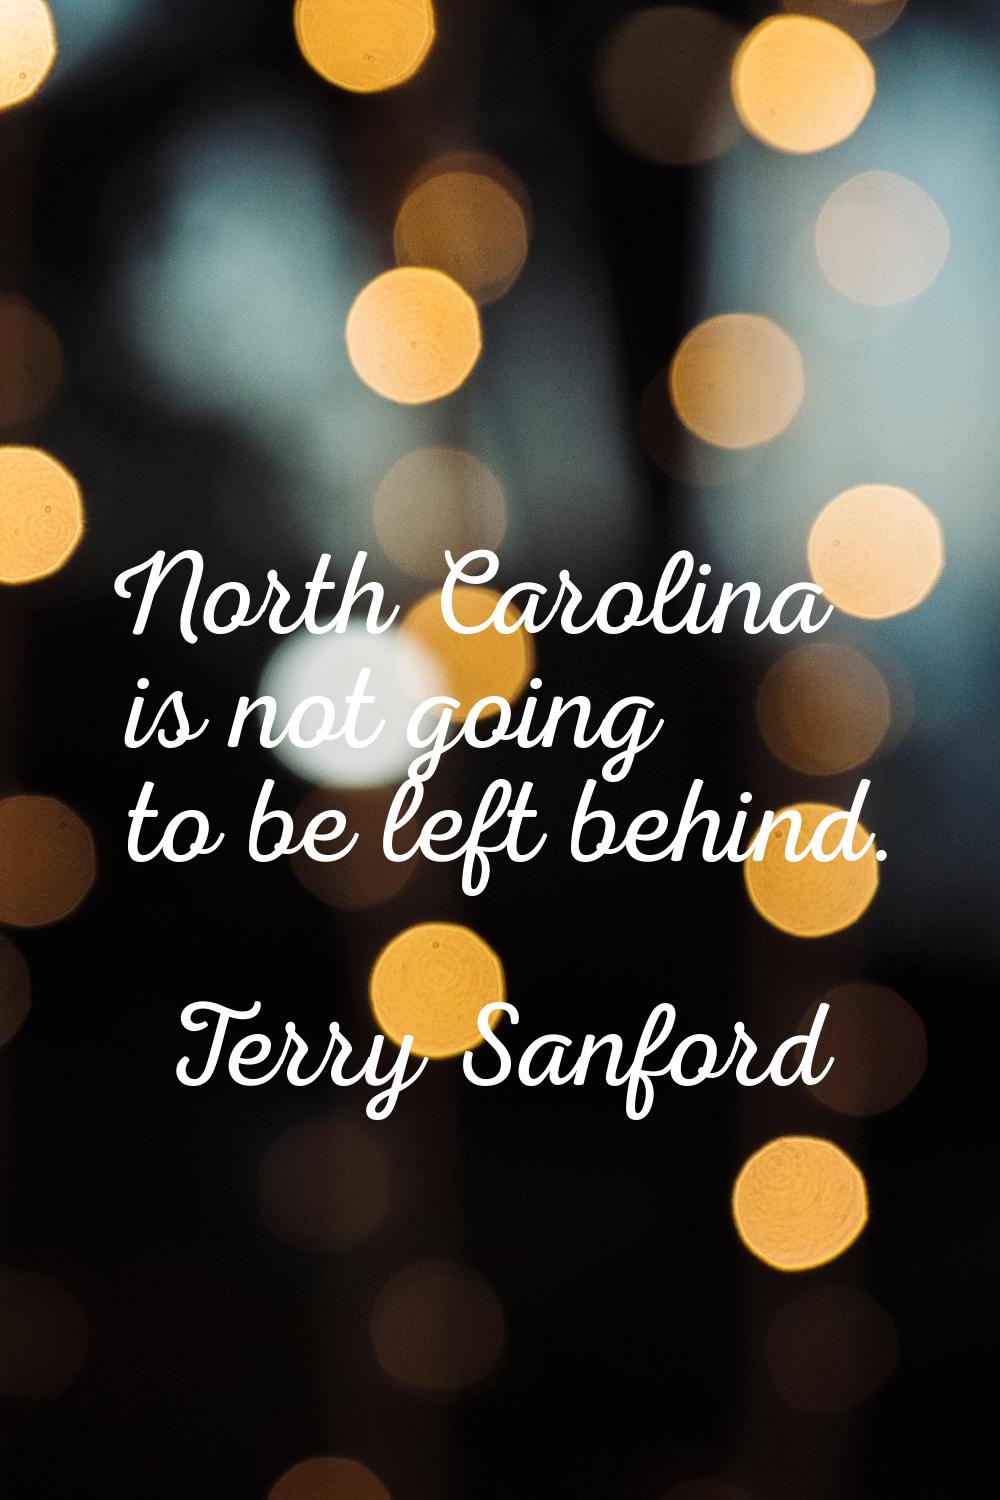 North Carolina is not going to be left behind.